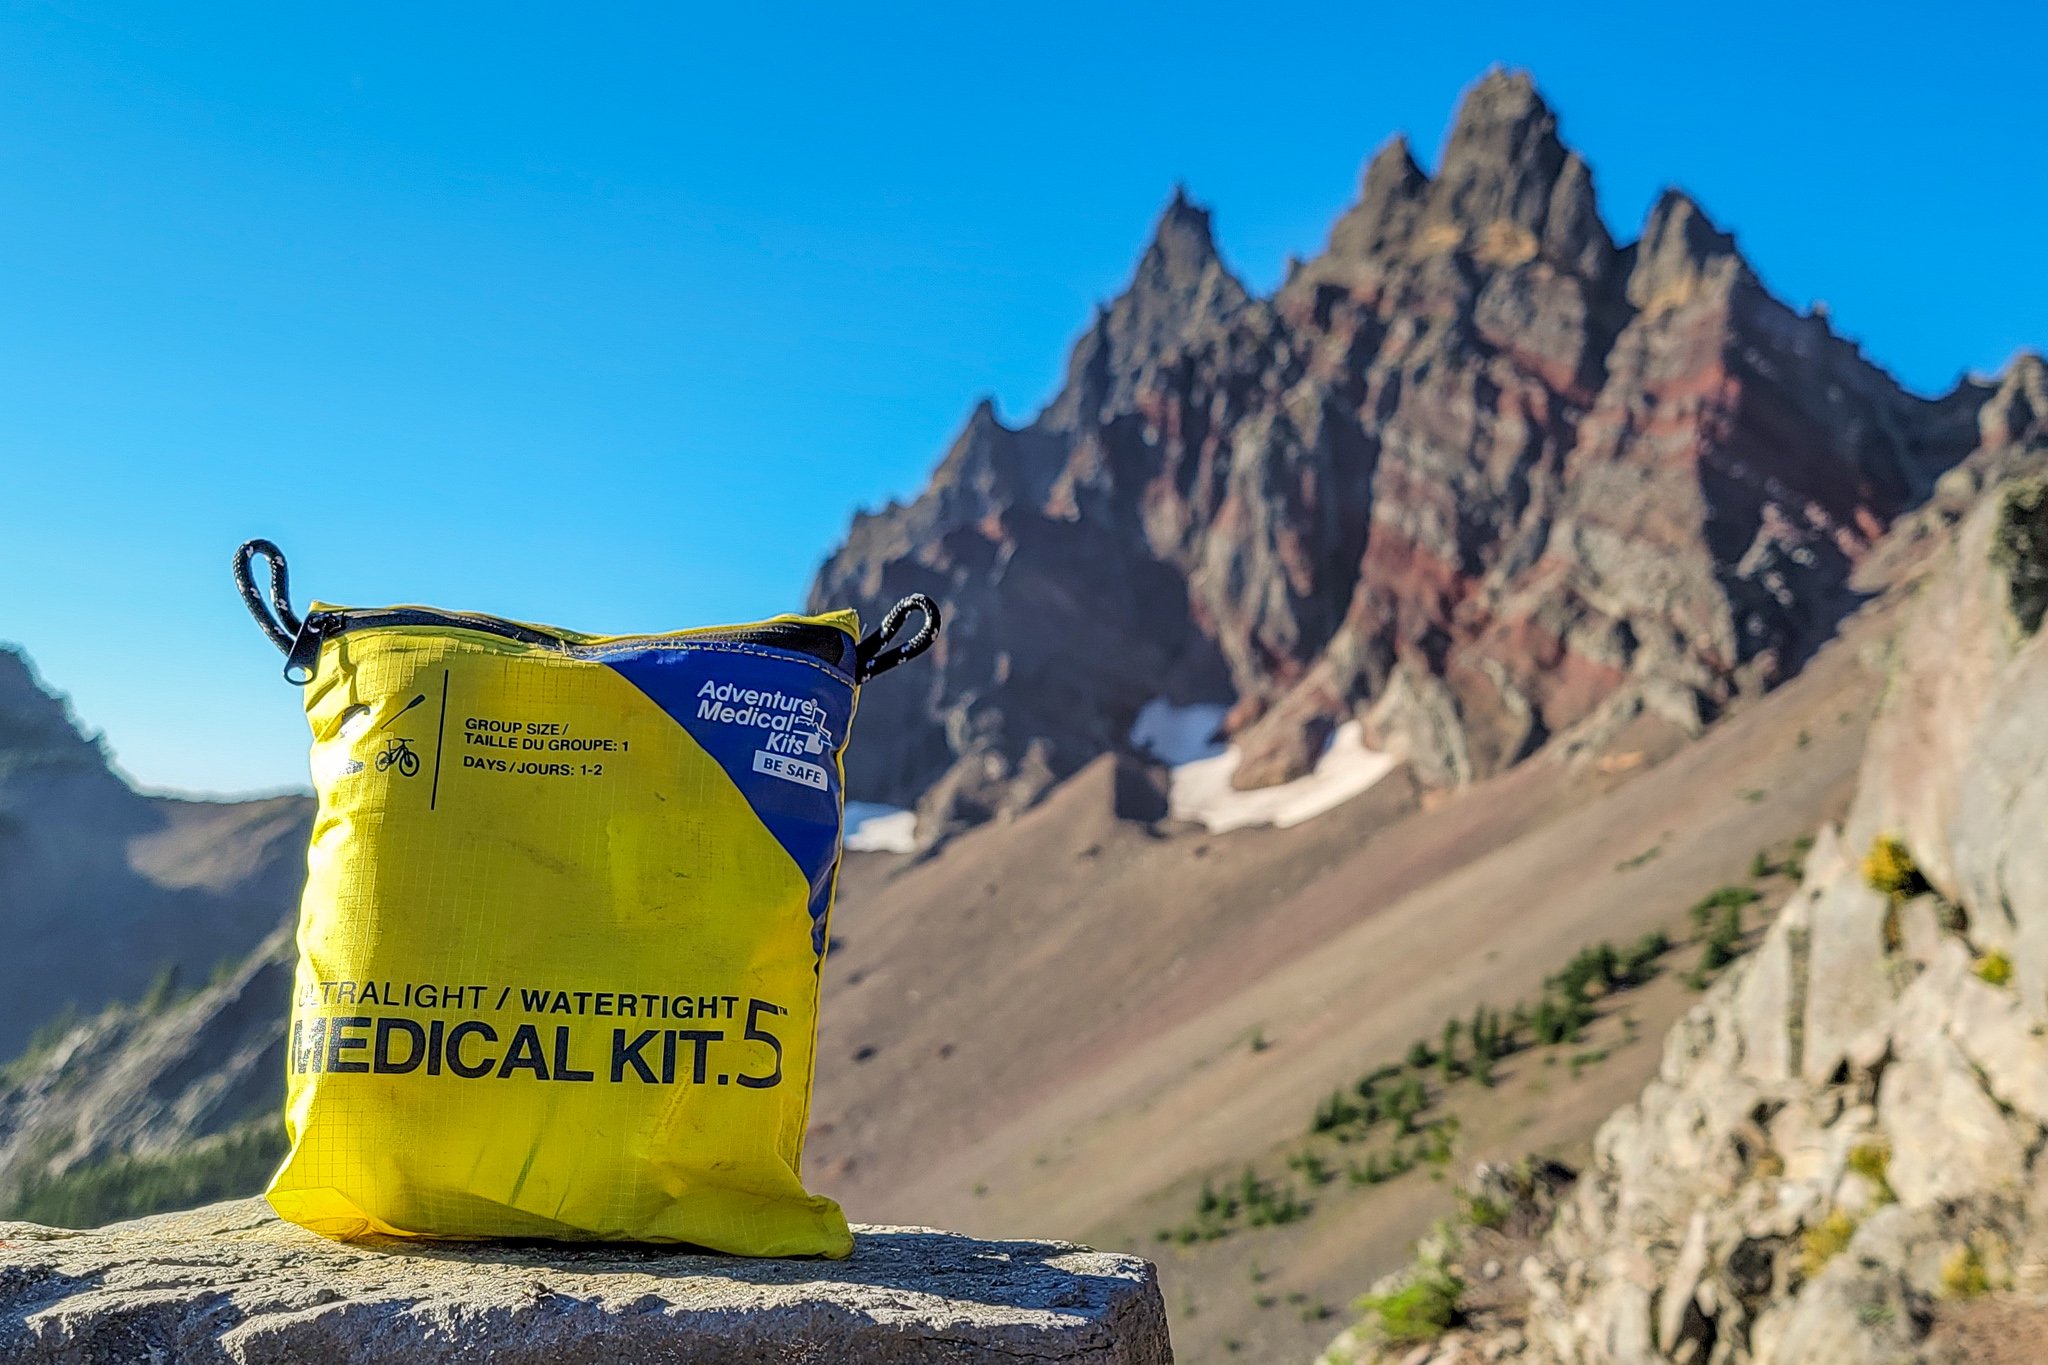 An Adventure Medical Kits First Aid Kit sitting on a rock in front of a mountain view